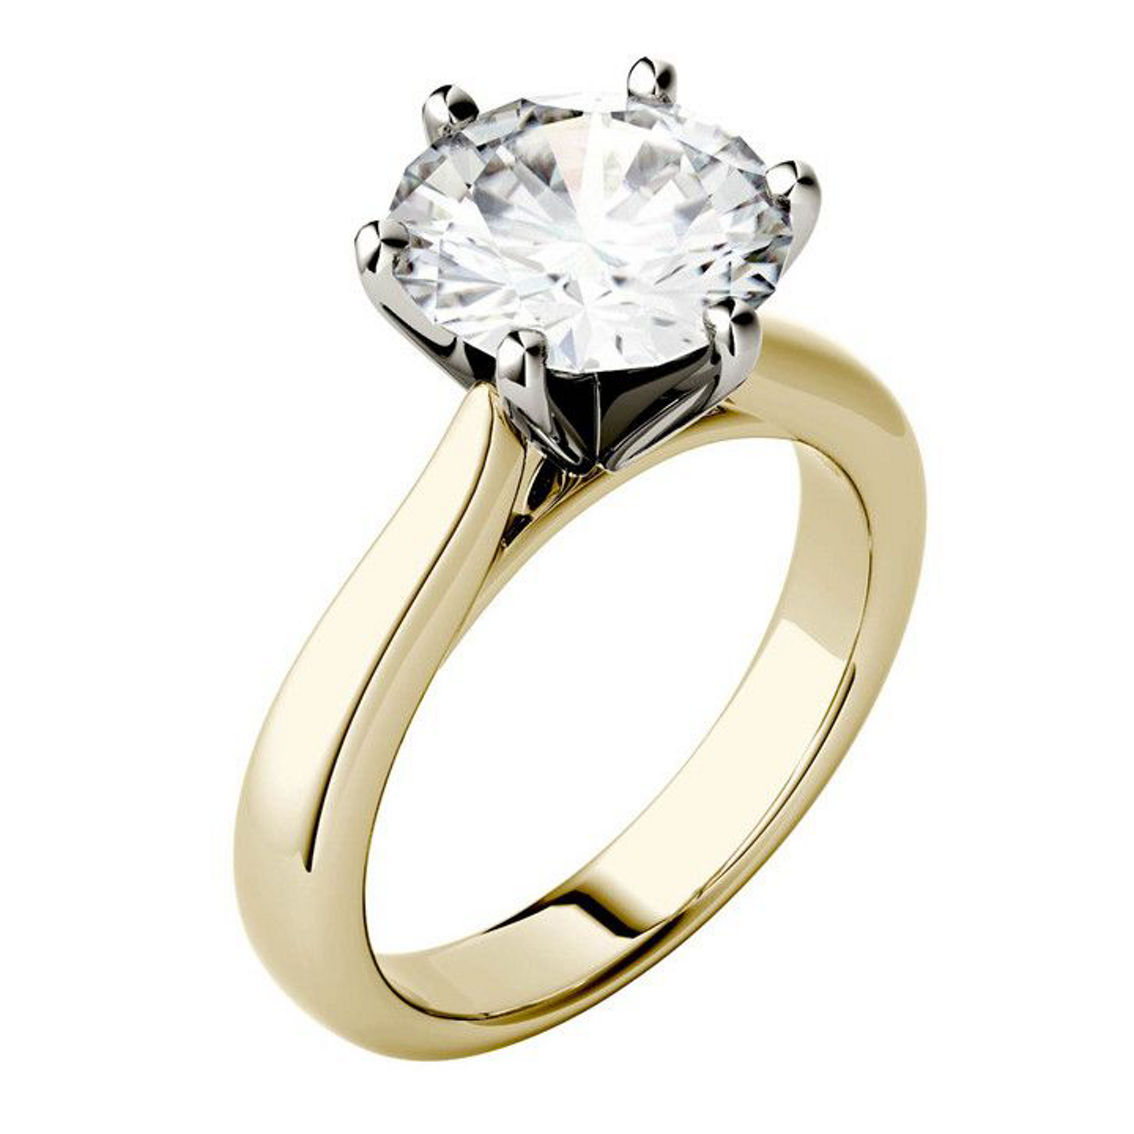 Charles & Colvard 3.10cttw Moissanite Solitaire Engagement Ring in 14k White Gold - Image 2 of 5